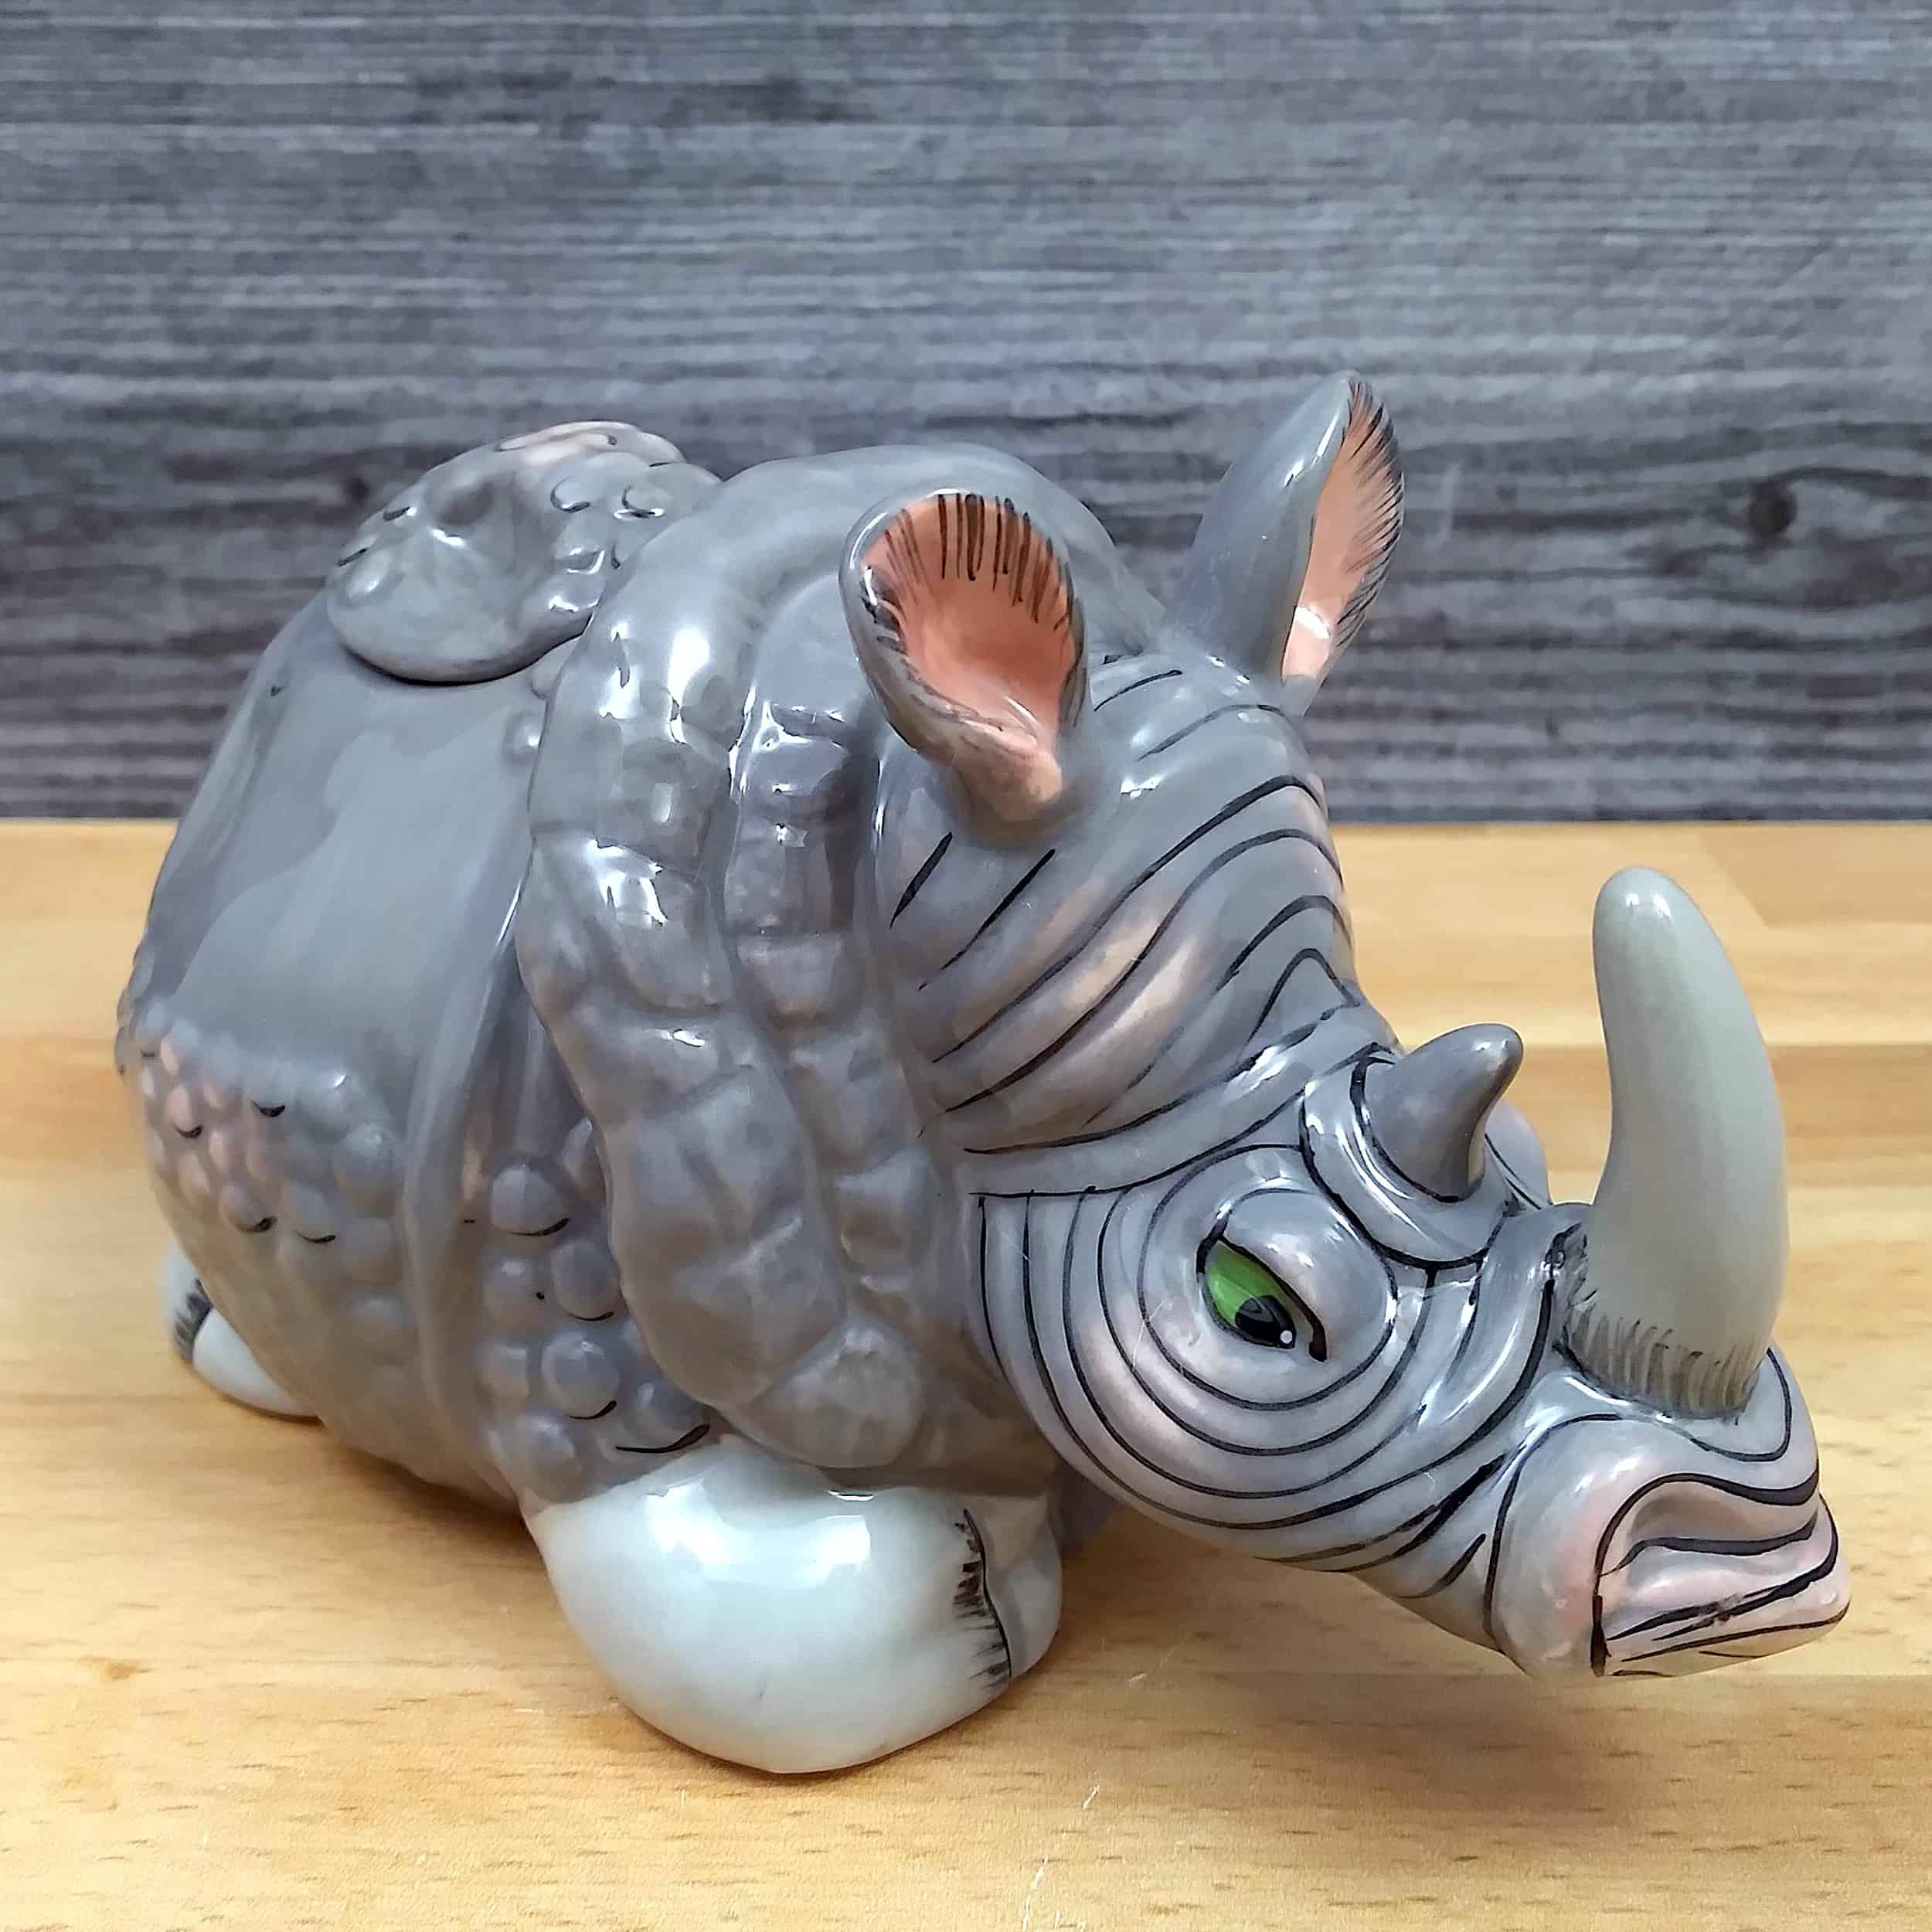 This Rhino Sugar Bowl and Creamer Set Decorative by Blue Sky is made with love by Premier Homegoods! Shop more unique gift ideas today with Spots Initiatives, the best way to support creators.